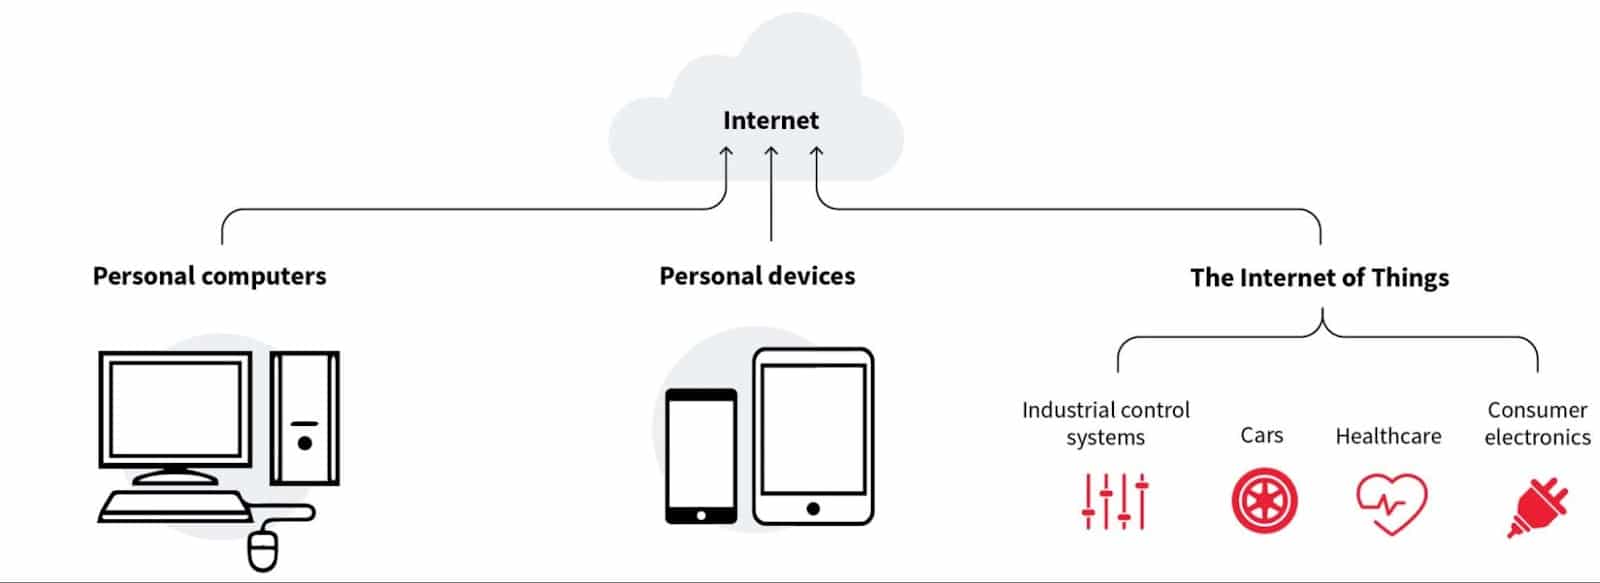 Household devices through which hackers can enter the IoT